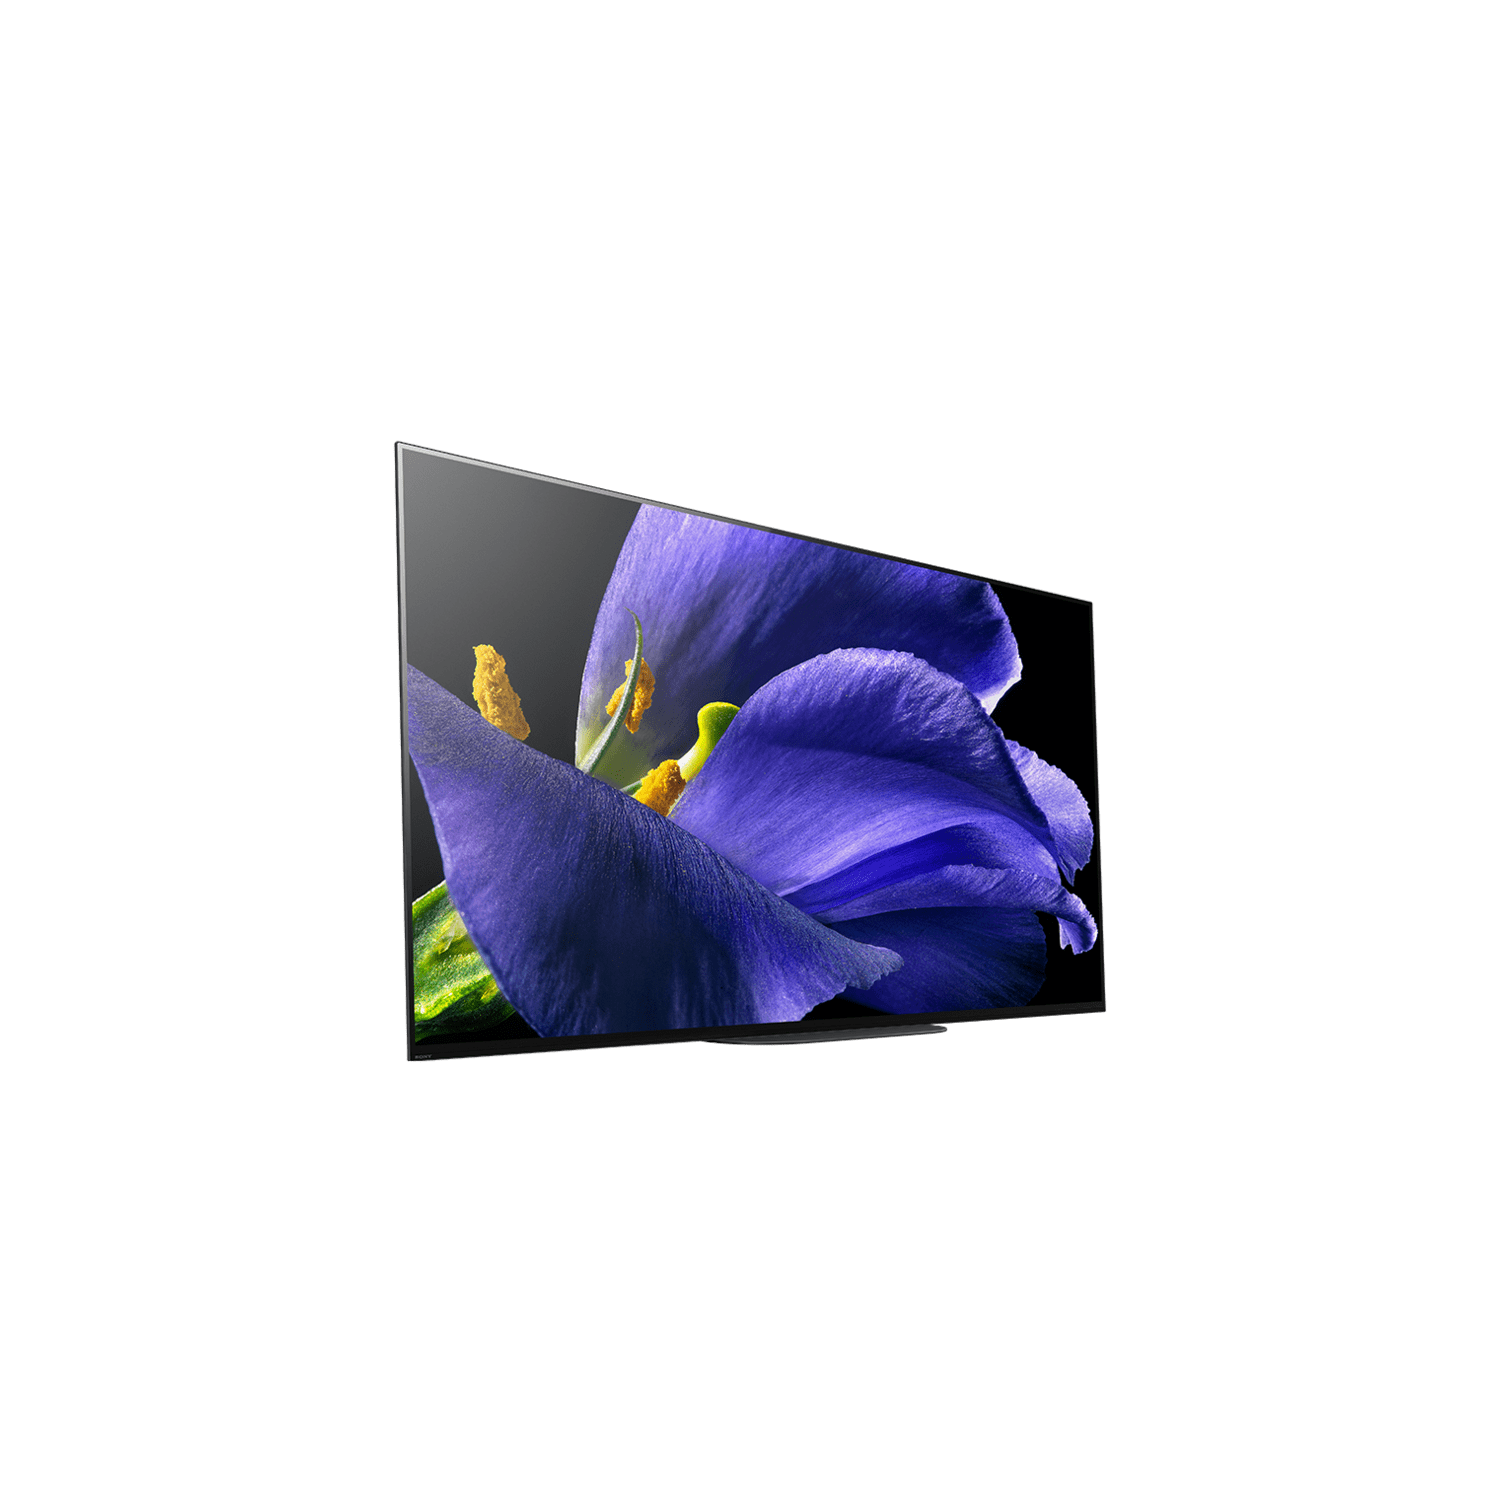 Sony KD- 65" A9G MASTER Series OLED 4K Ultra HD Android TV - Consignment